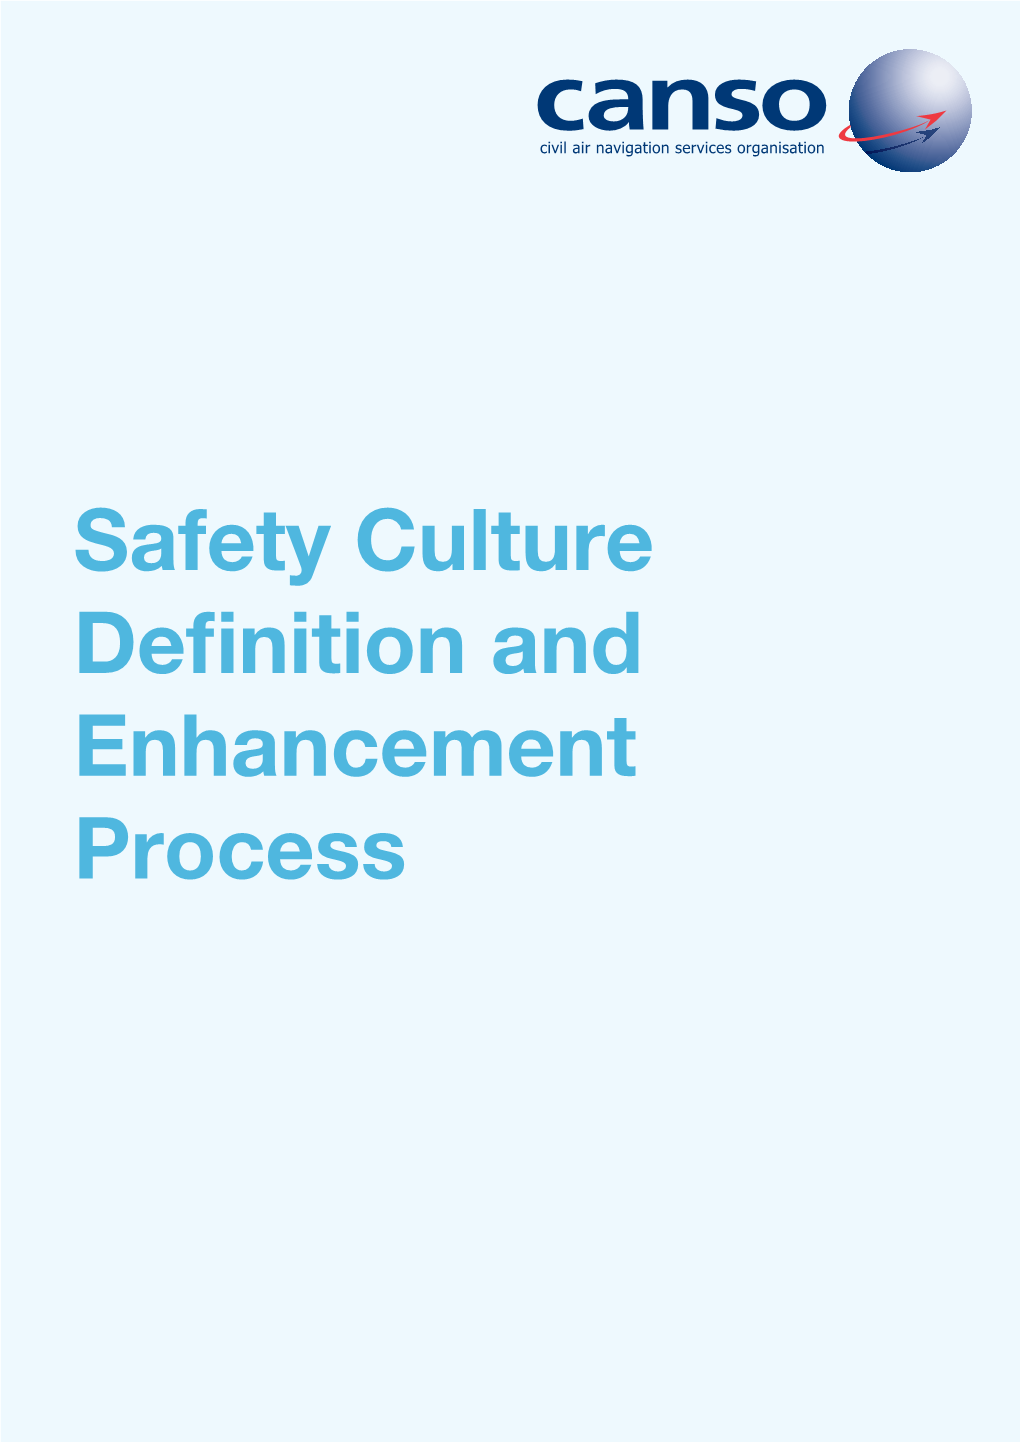 Safety Culture Definition and Enhancement Process Safety Culture Definition Contents and Enhancement Process